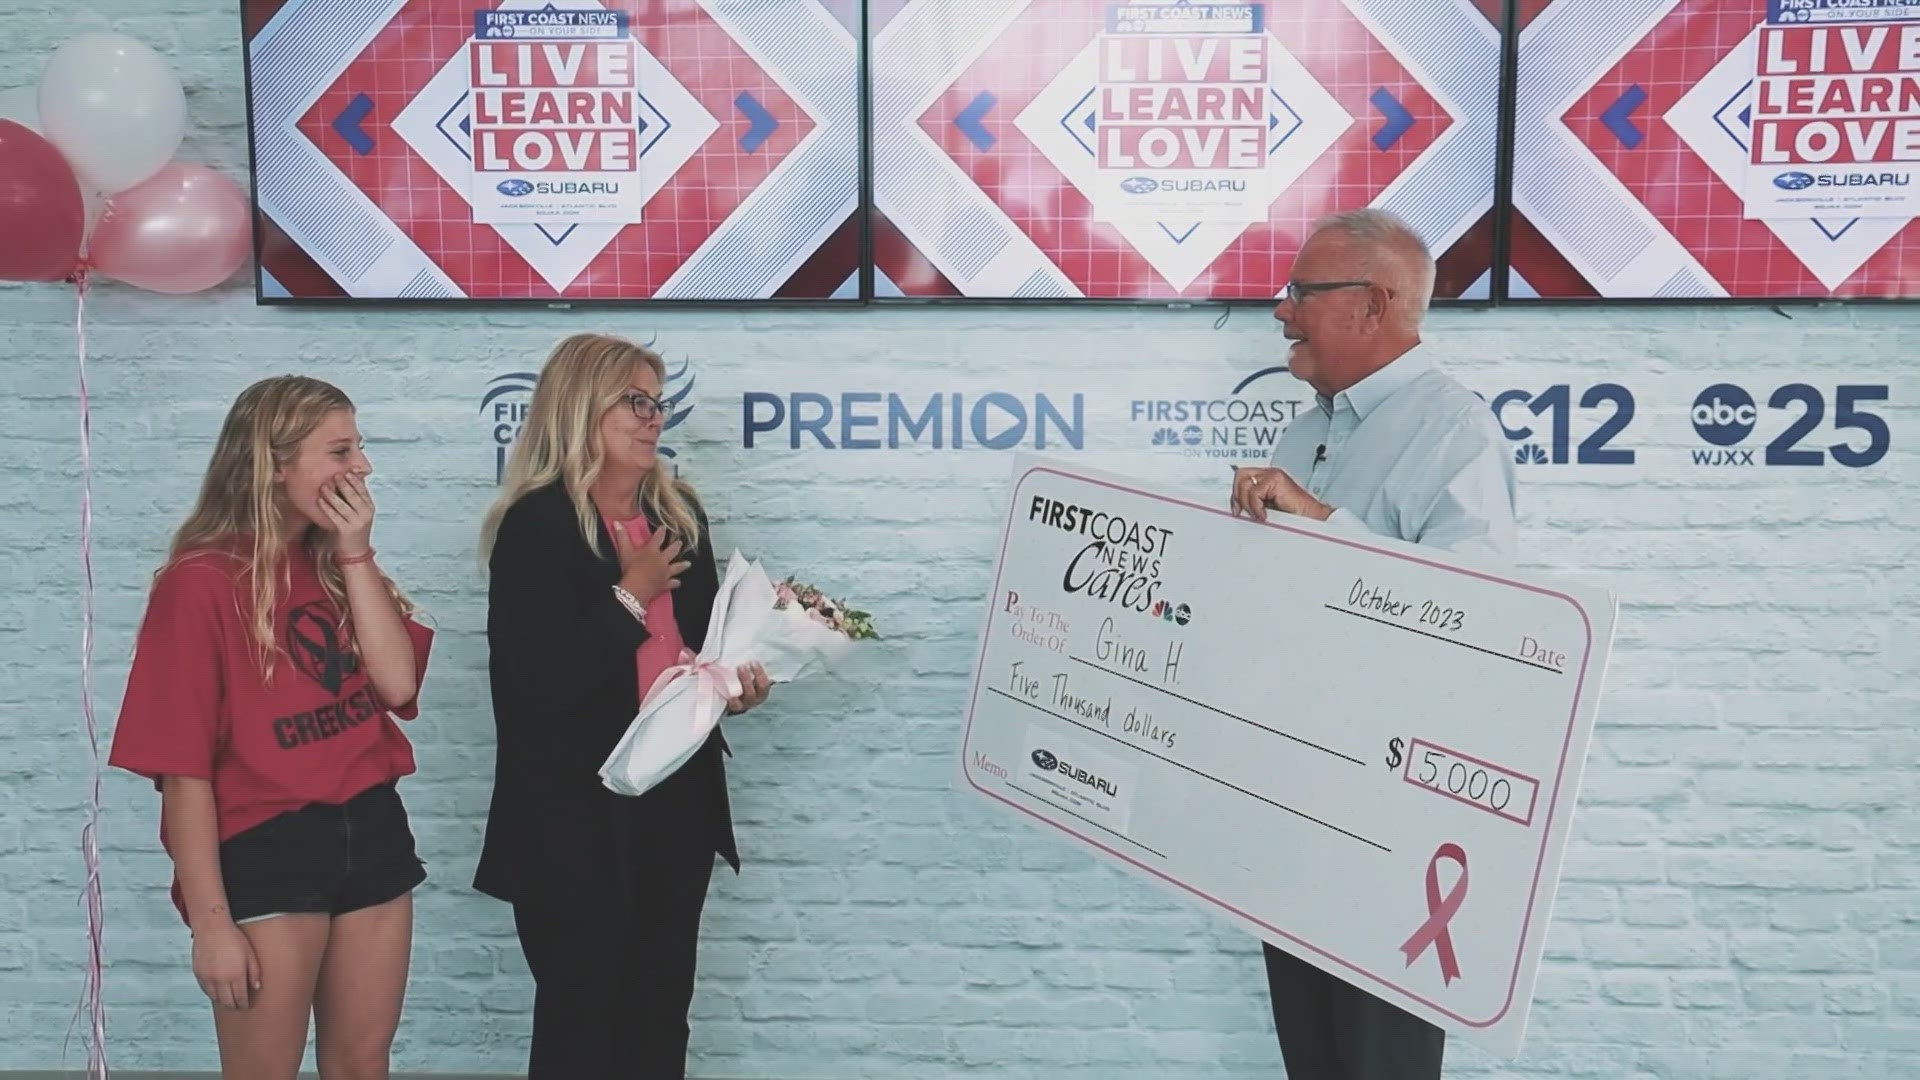 Gina Hansen is frank about life after getting a double mastectomy, and that includes financial struggles. But then a surprise from Subaru of Jacksonville came about.